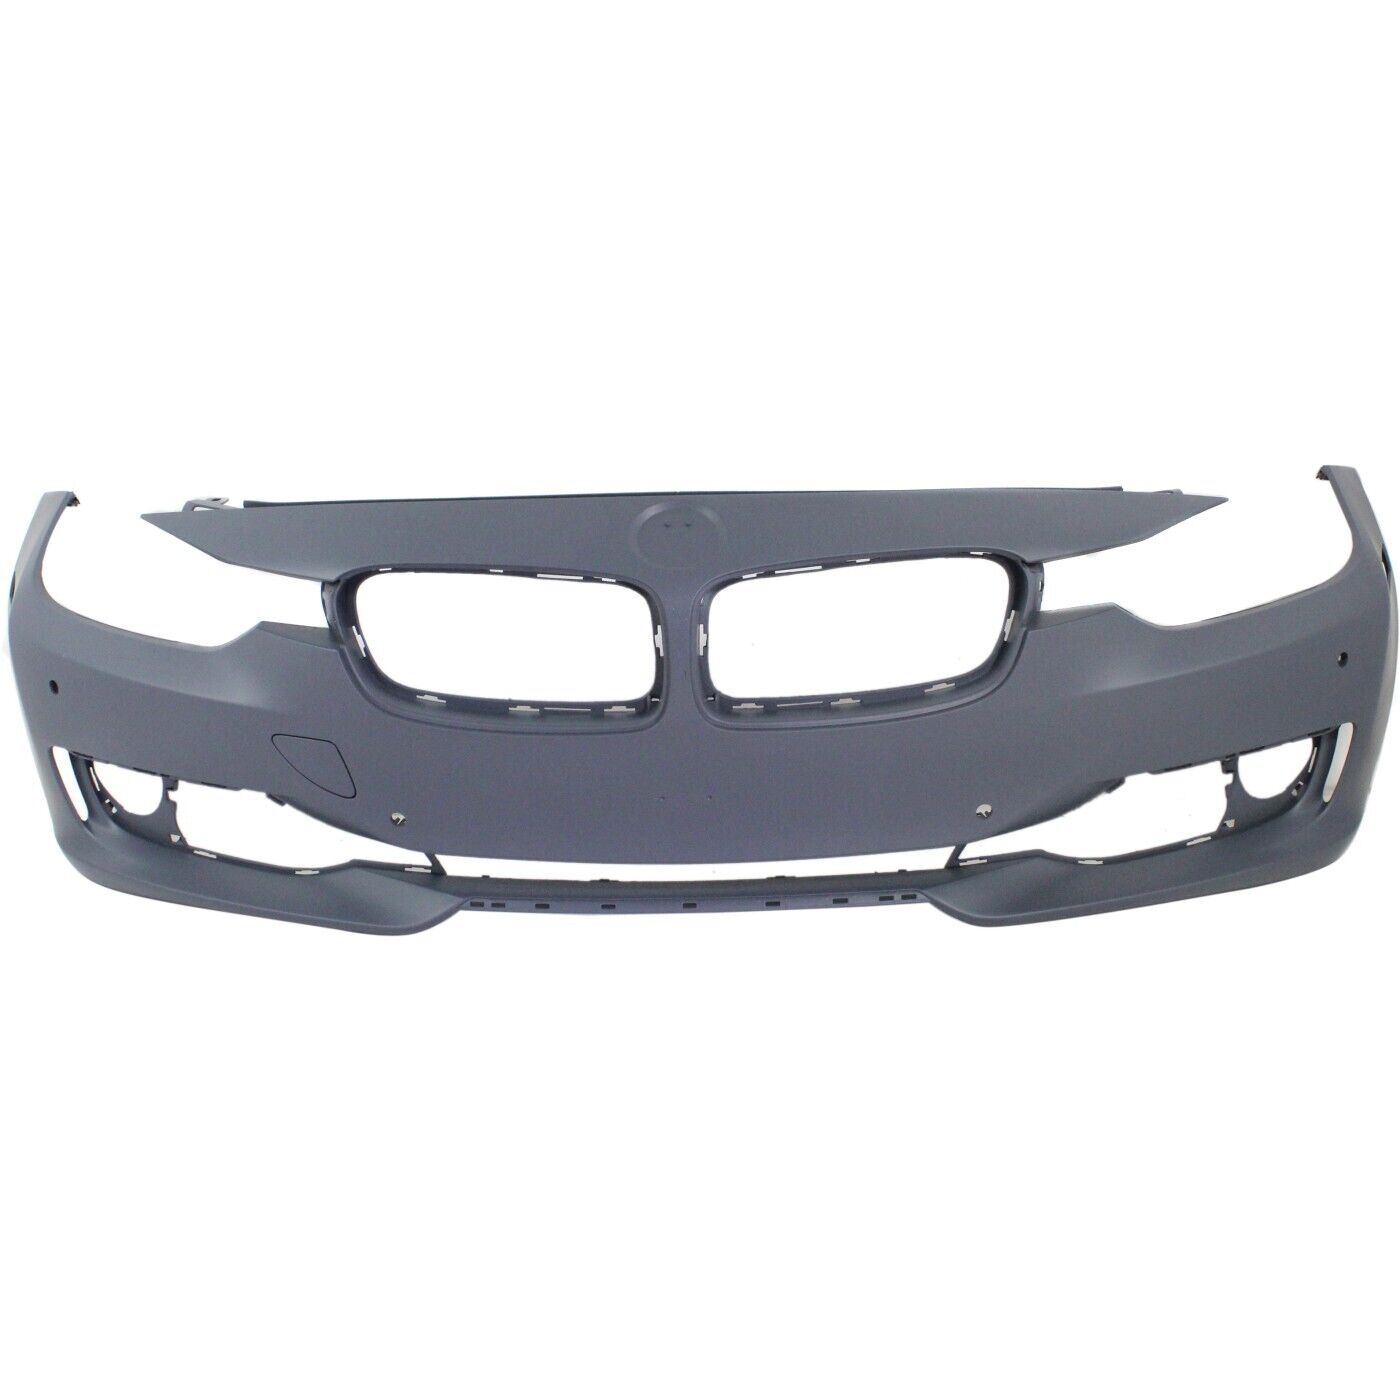 Front Bumper Cover For 2012-15 BMW 328i Modern/Luxury/Sport w/ PDC Sensor Holes